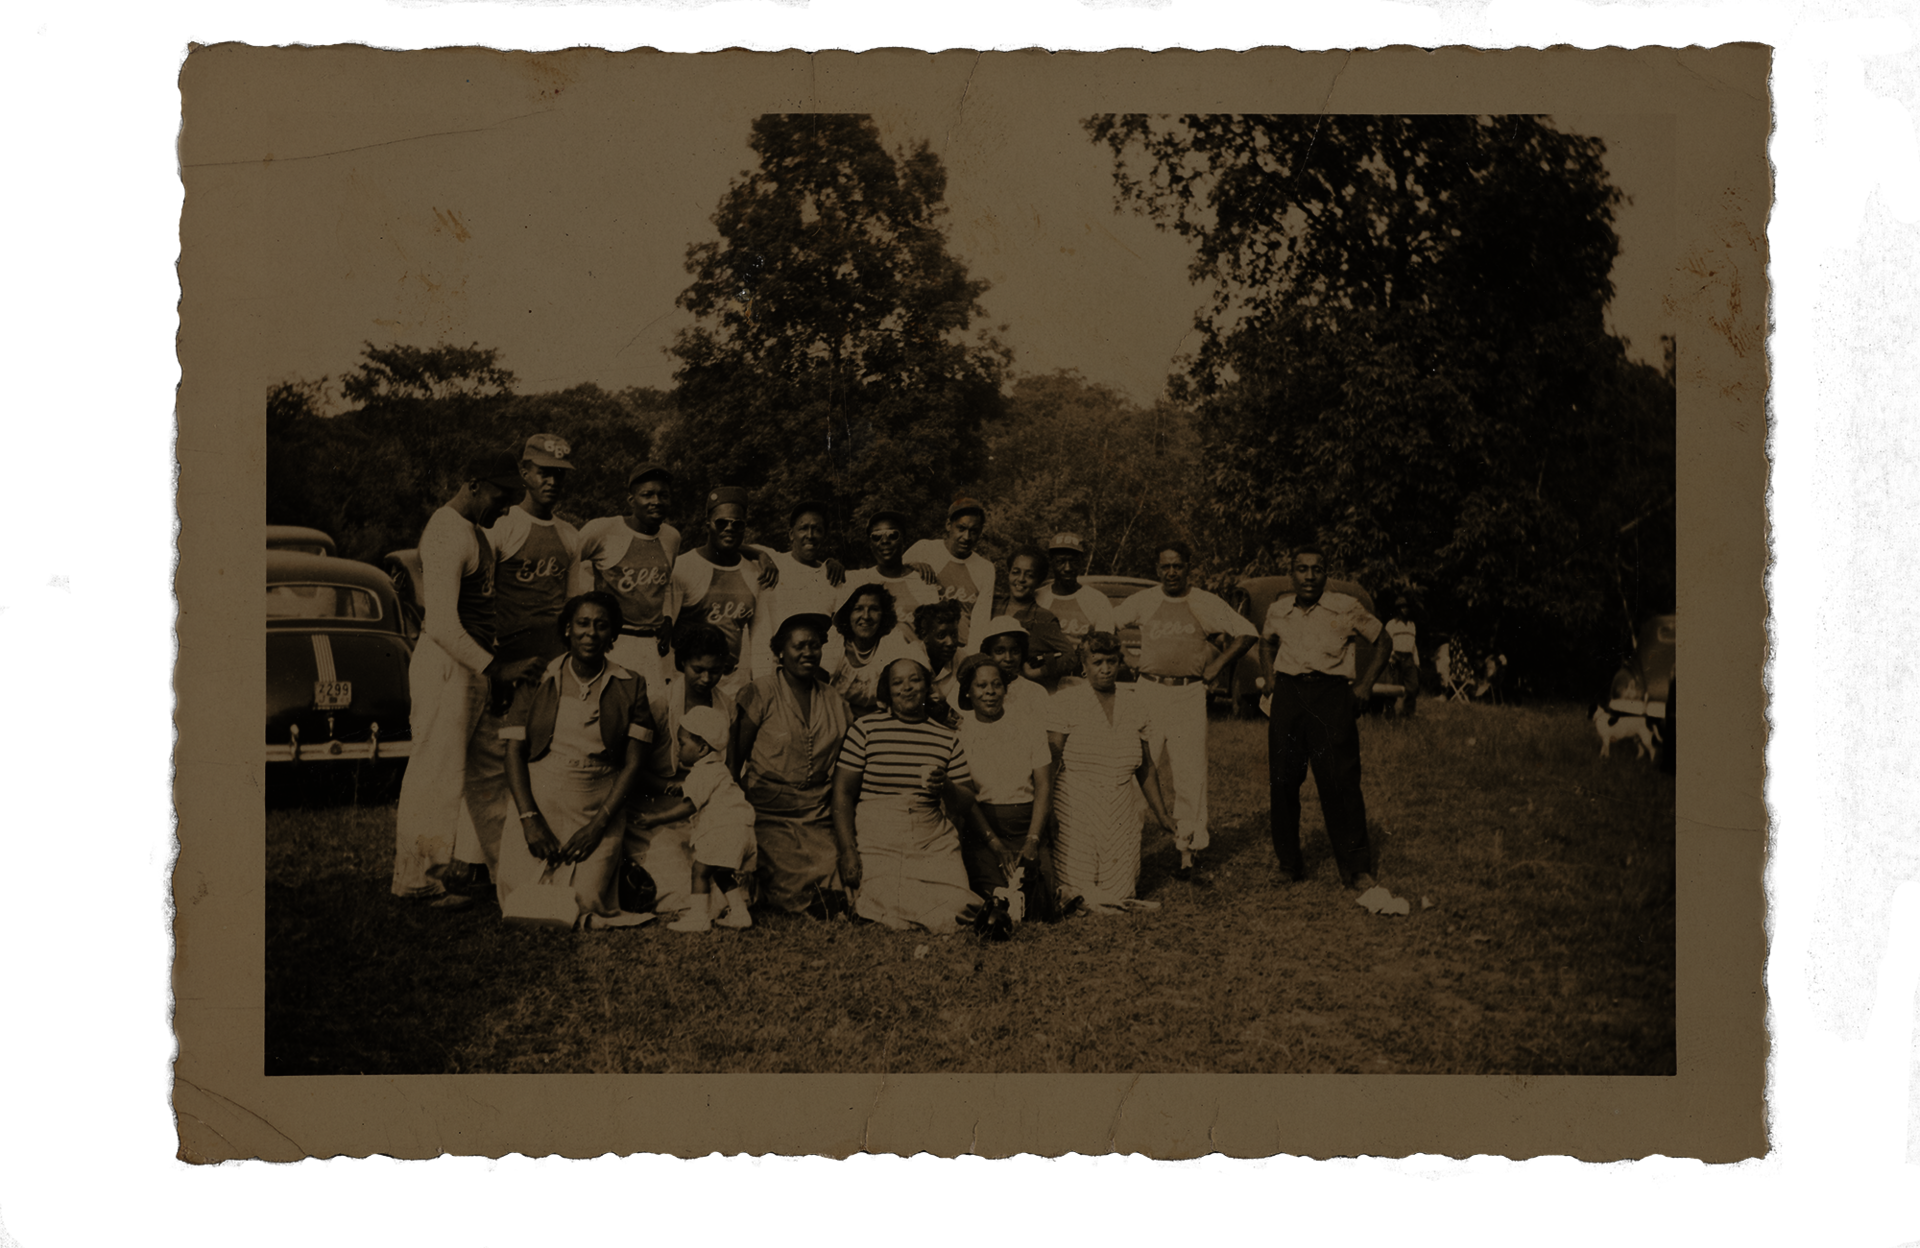 sepia tinted group photo of baseball players and friends